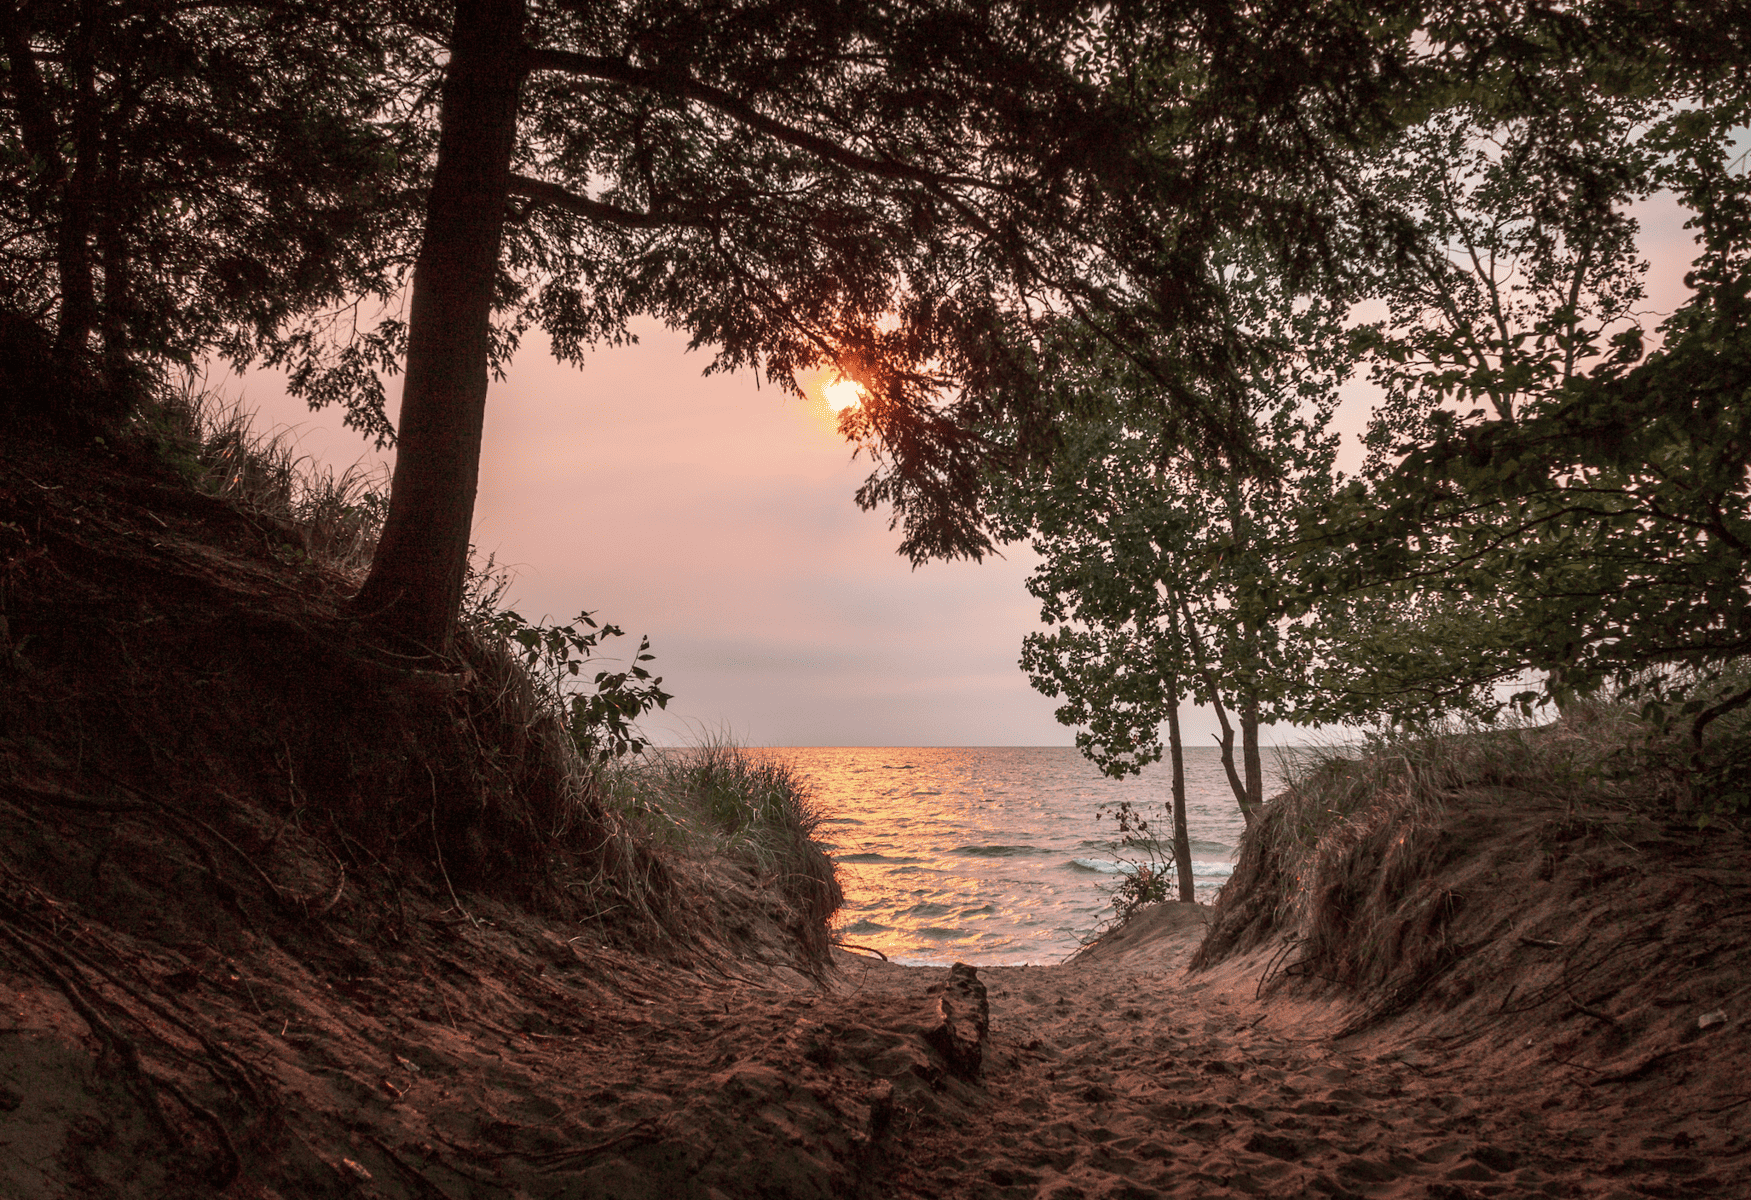 Entrance to a Beach at Sunset